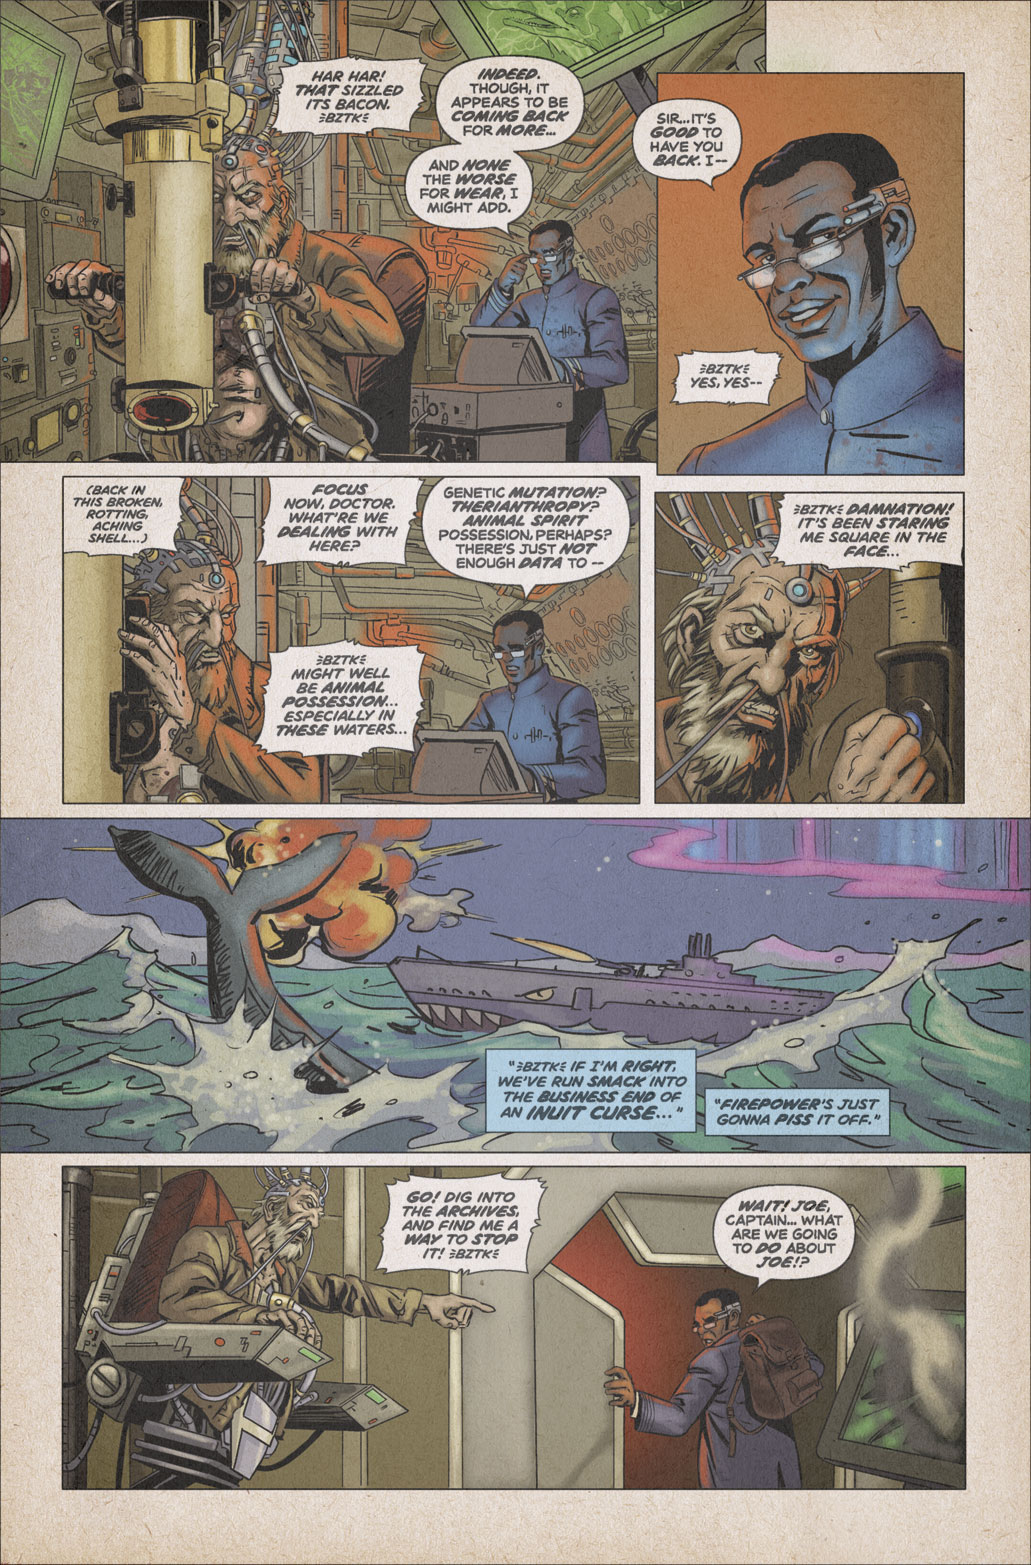 Secret of the Beaufort Sea – Page 22